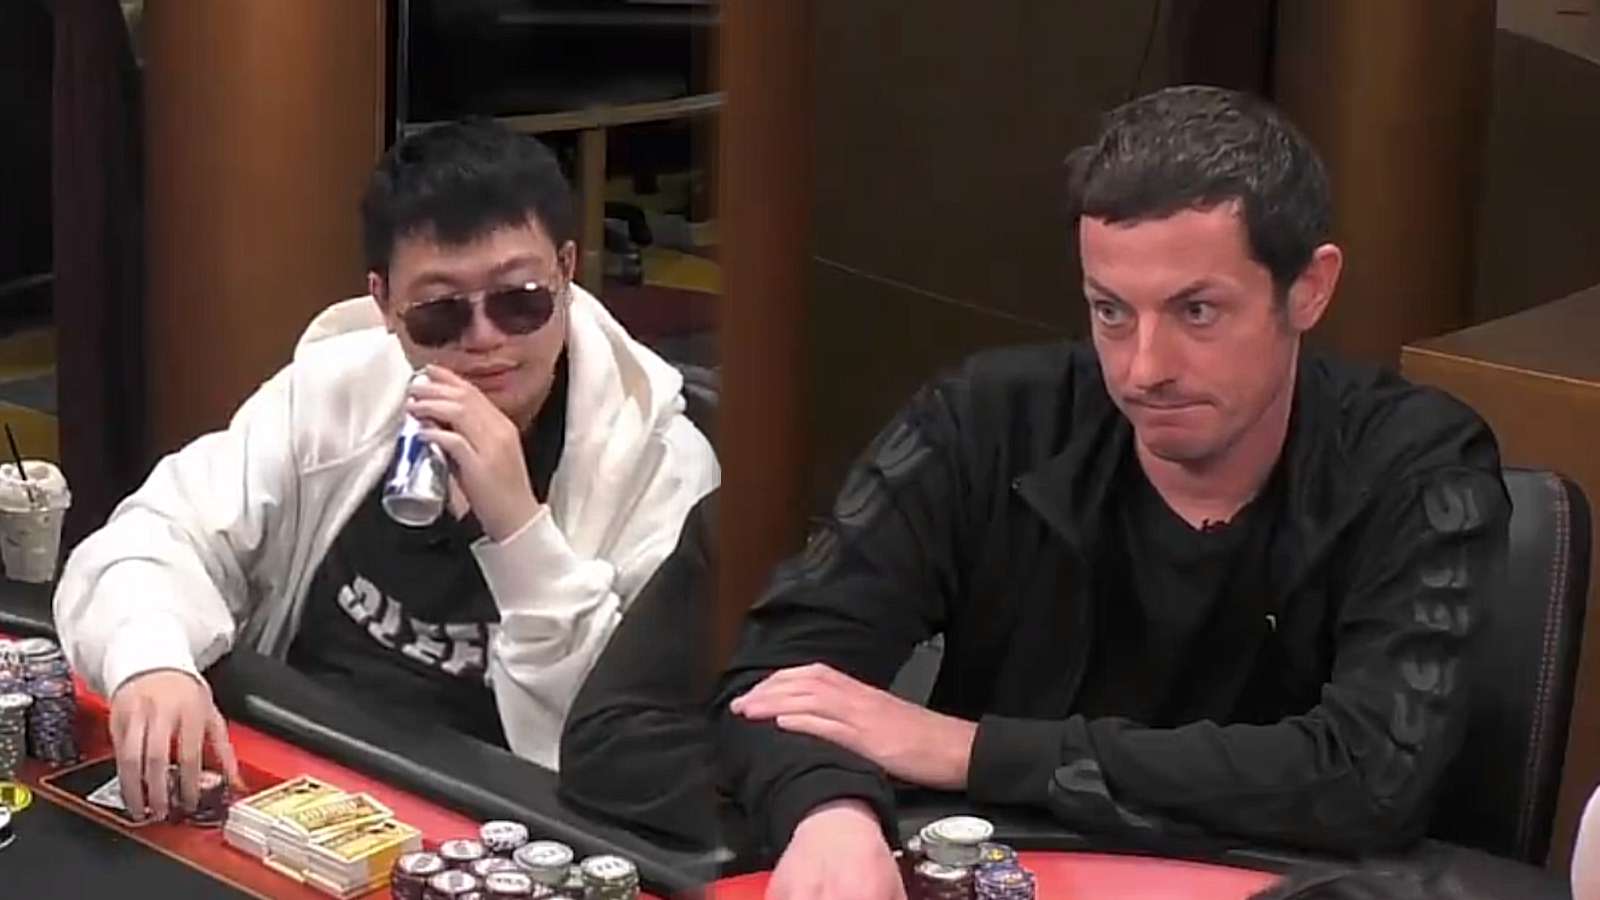 Wesley Fei and Tom Dwan looking at each other during pre-flop phase of a poker game.